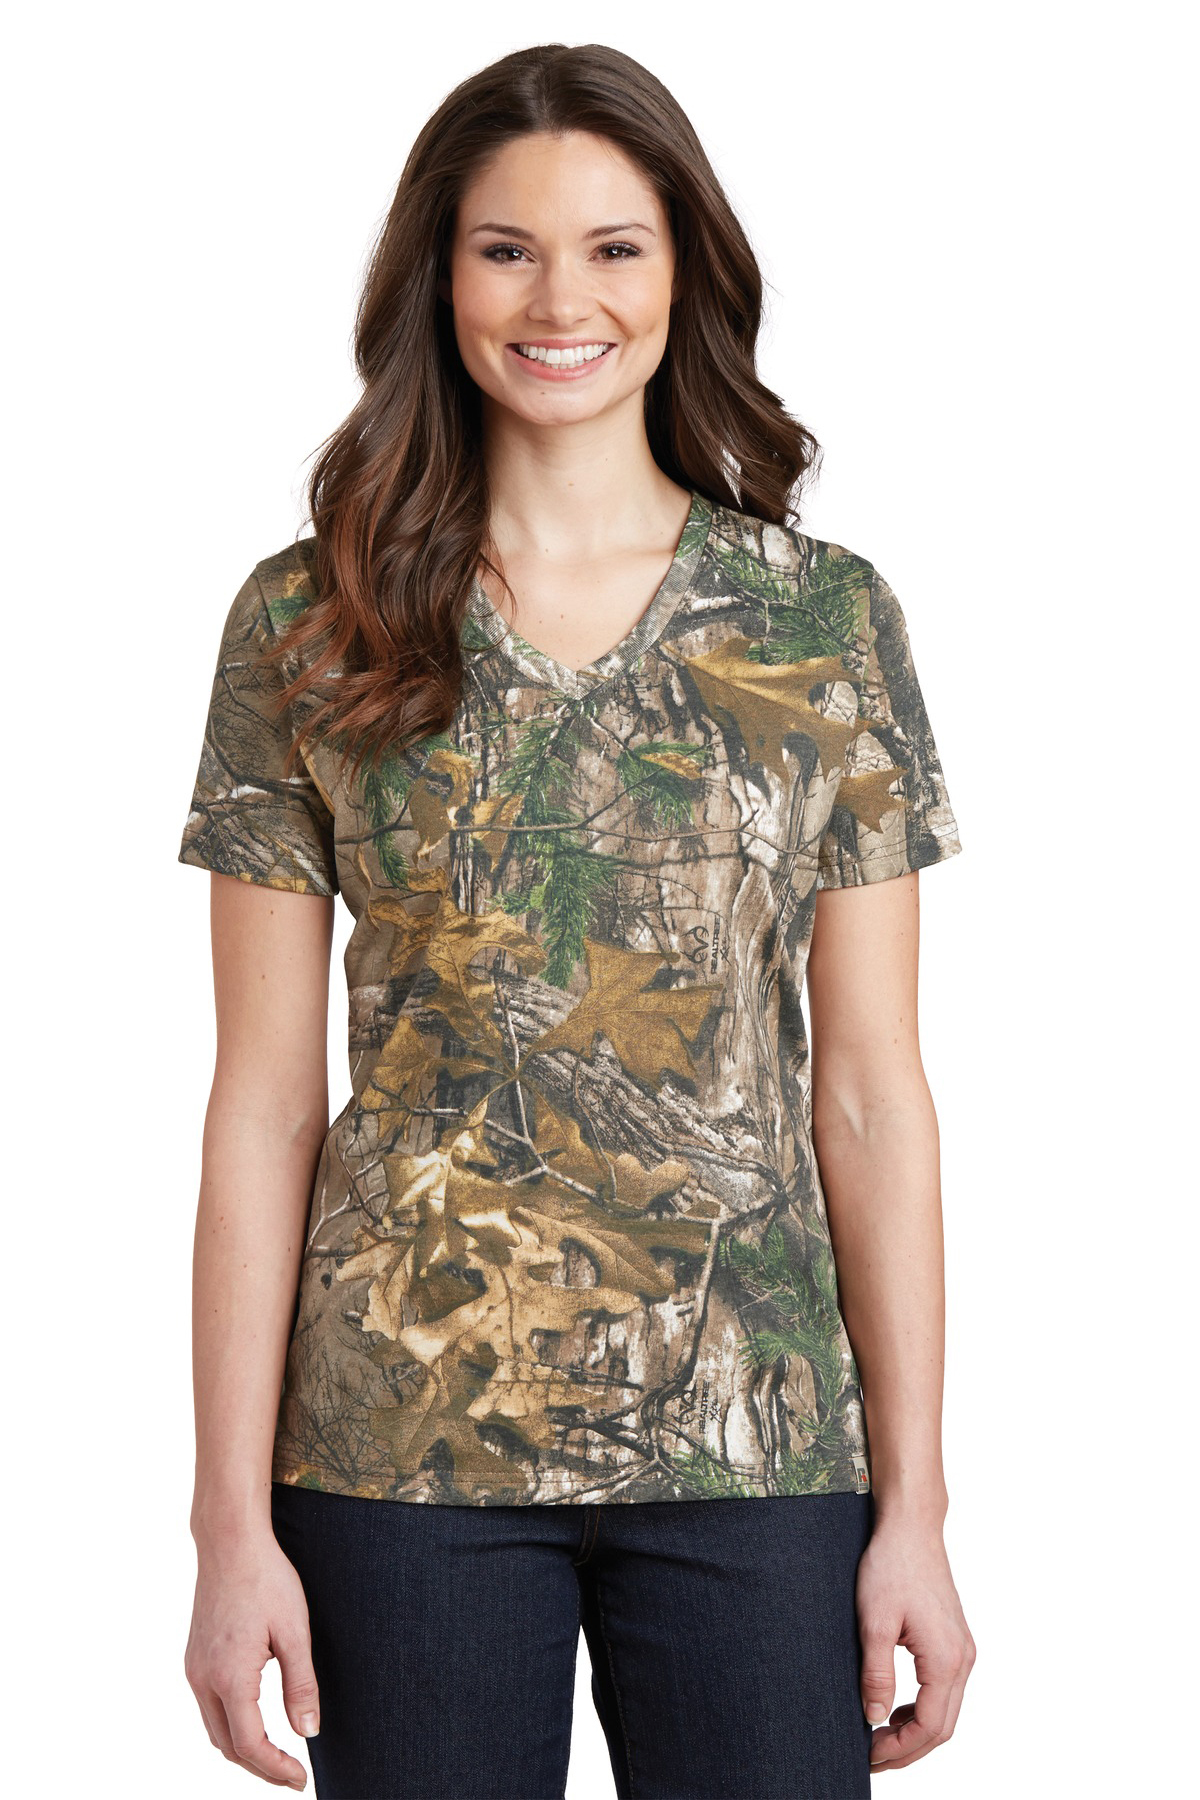 Russell Outdoors Realtree Long Sleeve Explorer 100% Cotton T-Shirt with  Pocket Style S020R